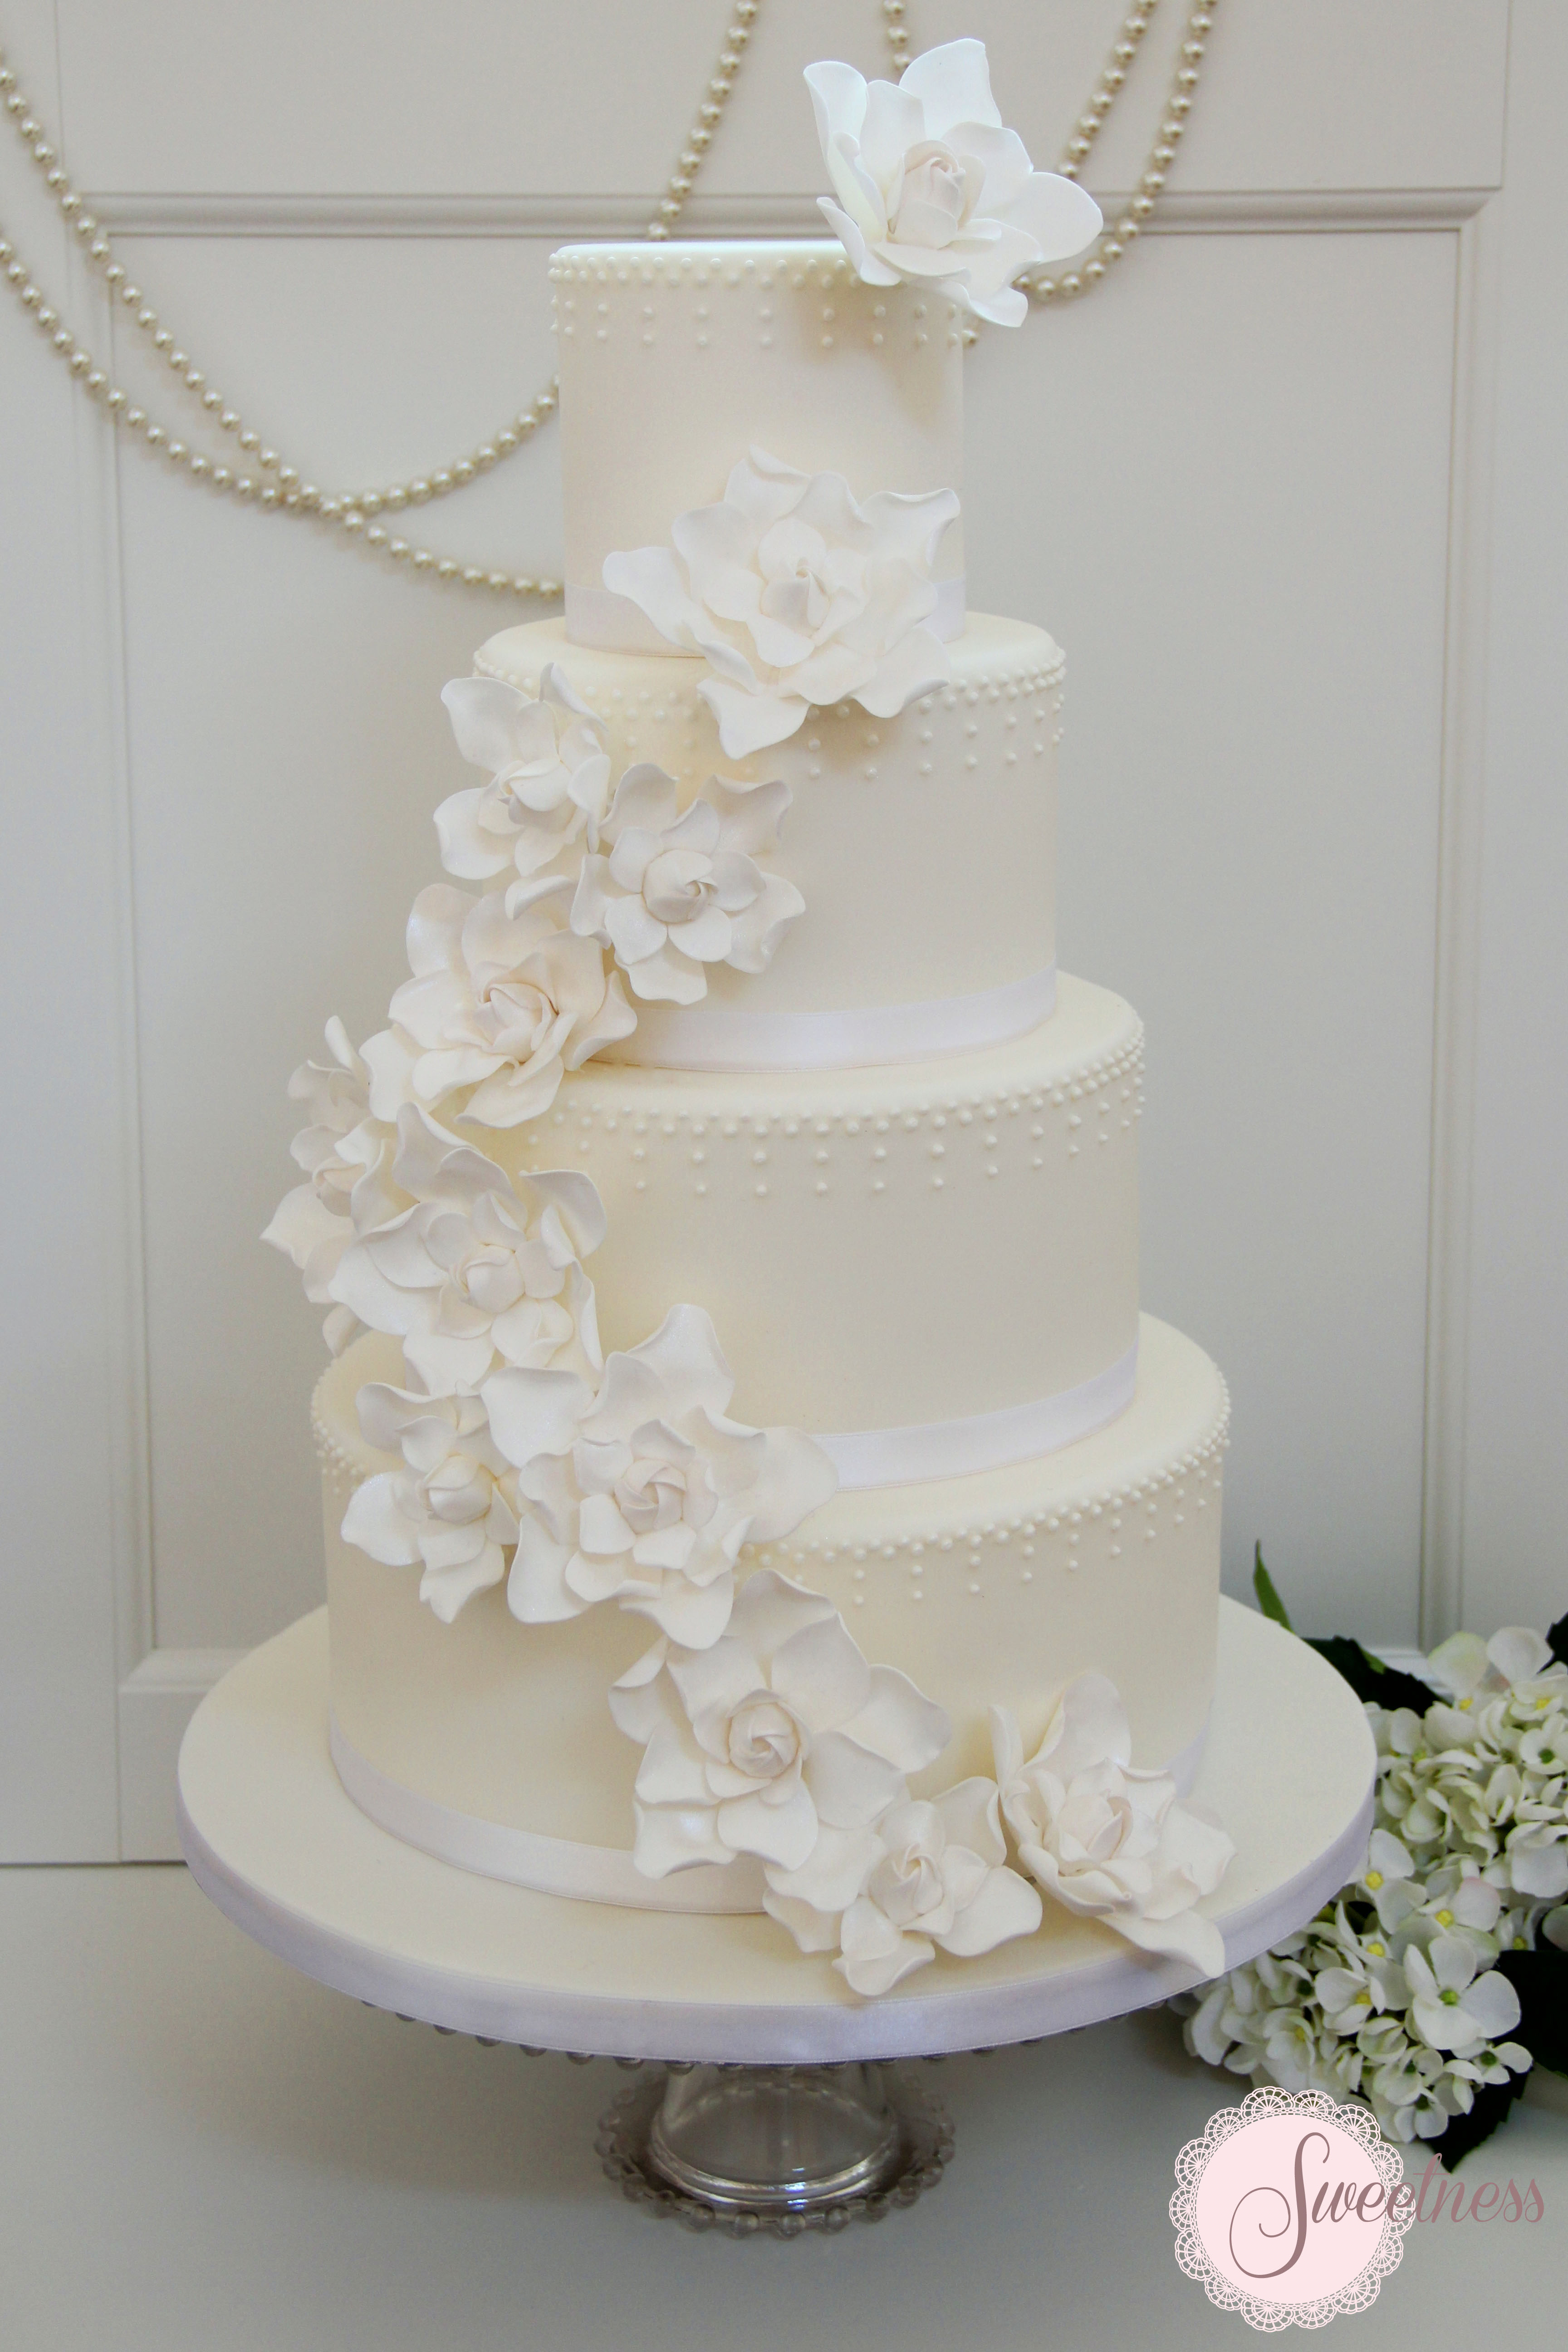 Bespoke wedding cakes and confectionery in London and Greater London. Designer wedding cakes